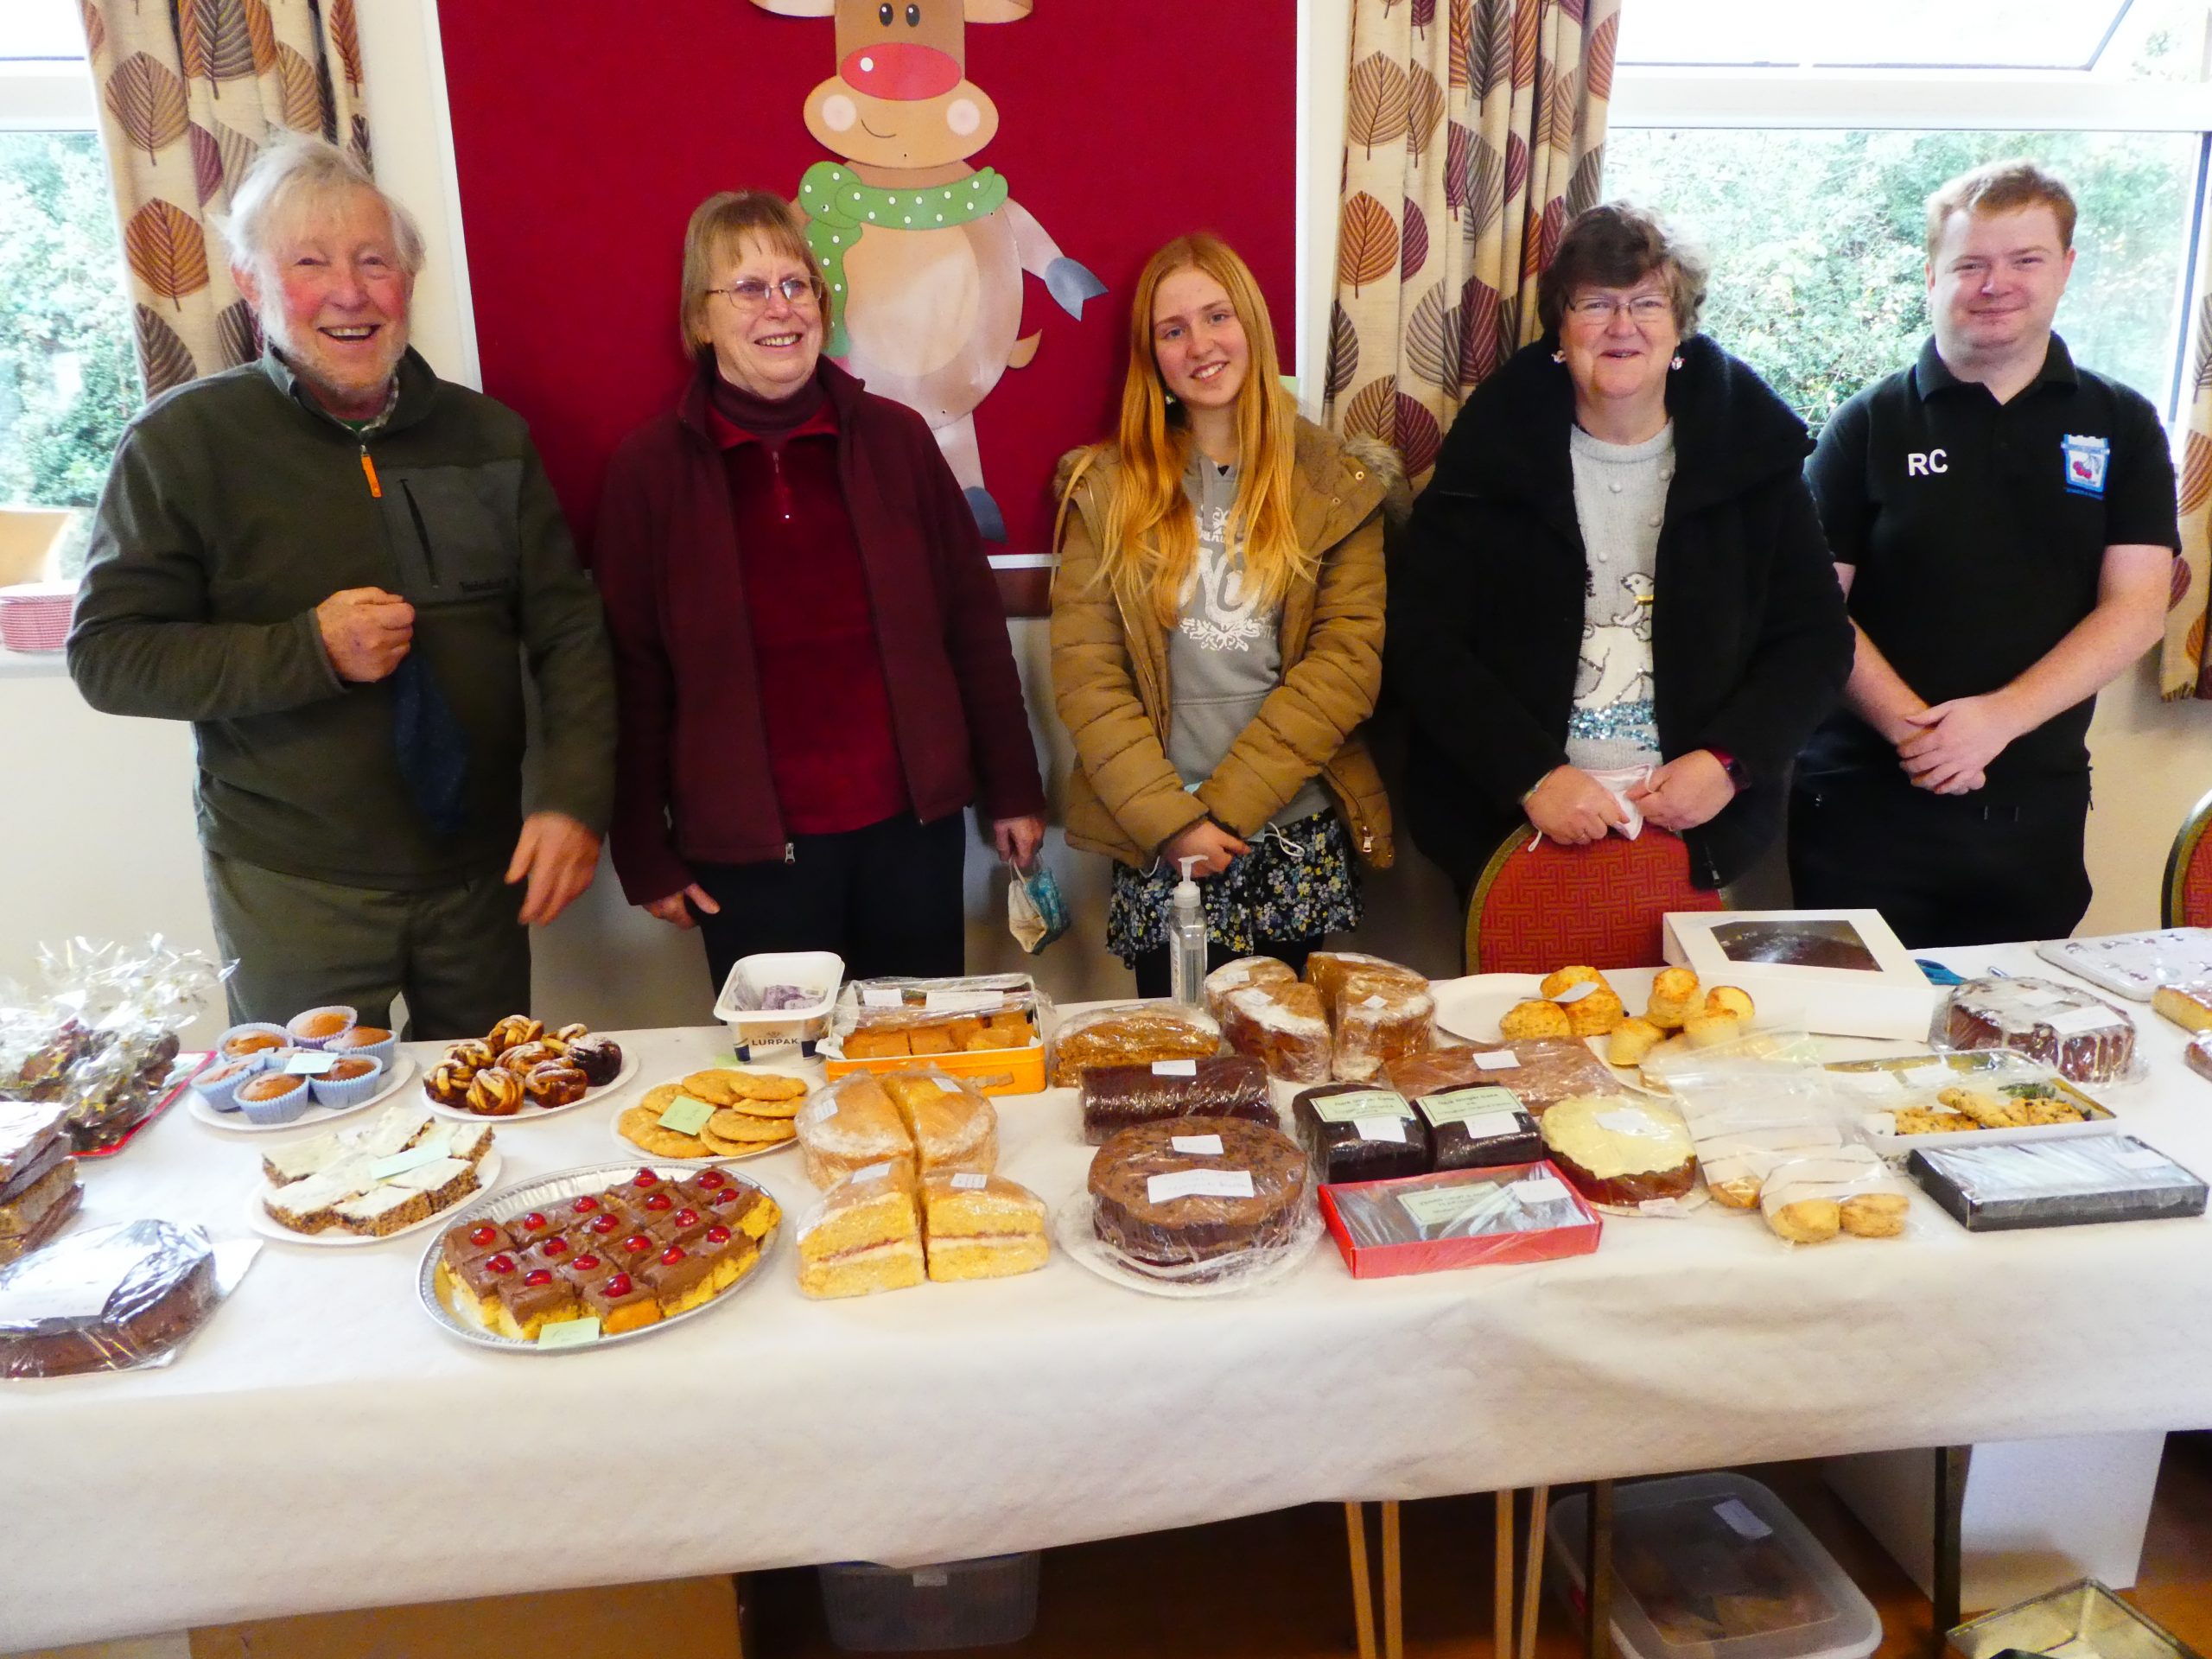 Cake stall raises over £150 for shop funds. Thank you